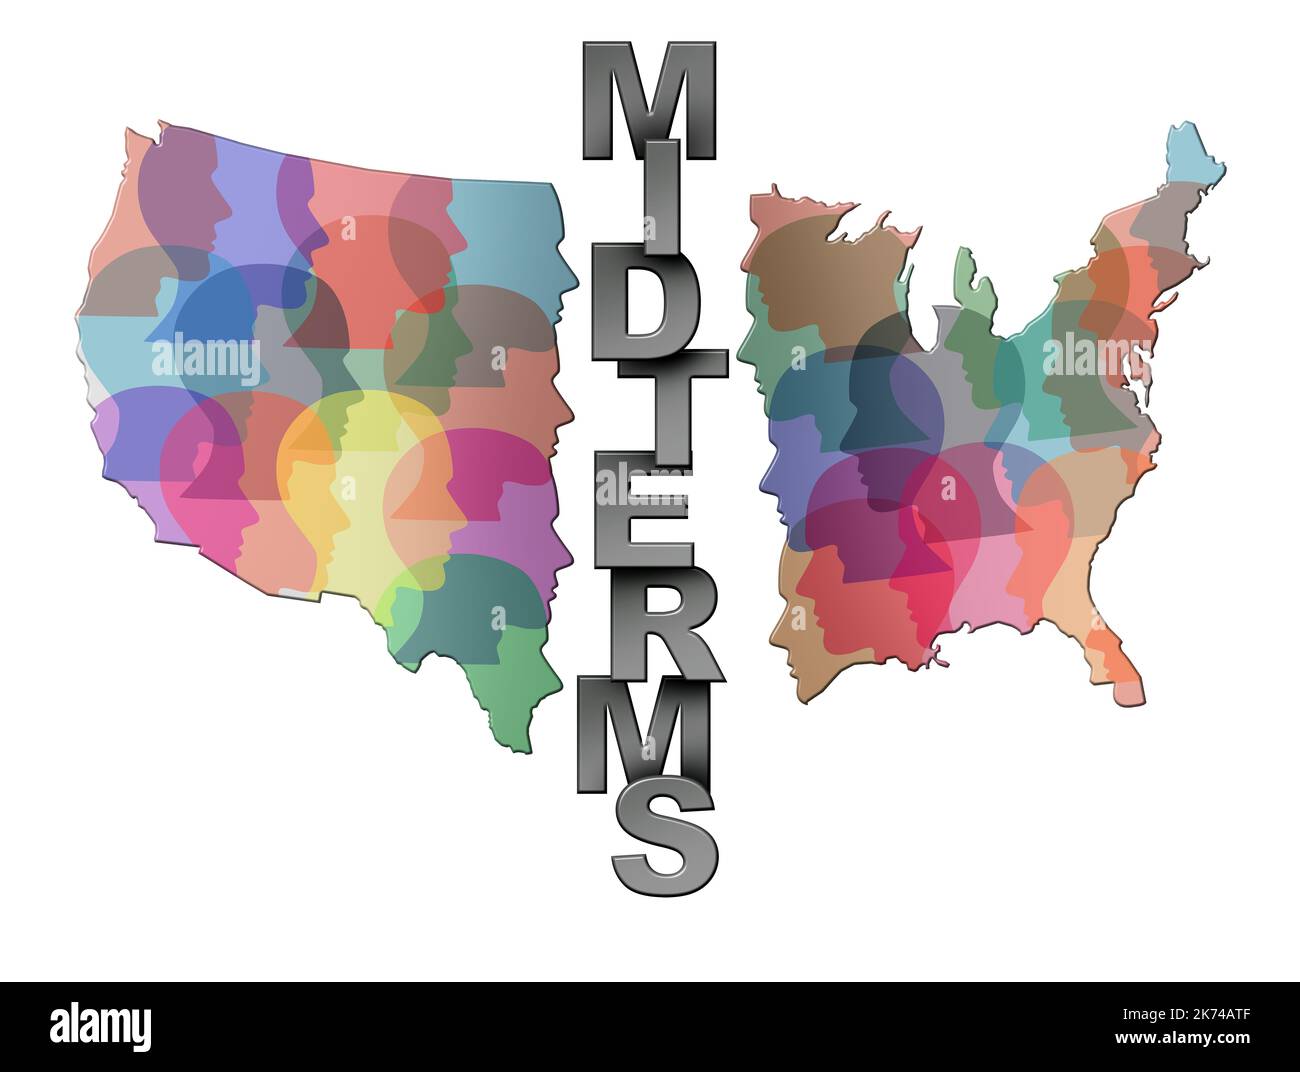 Midterm elections and Midterms concept or United States elections and USA vote and divided American politics as different philosophy as cultures. Stock Photo